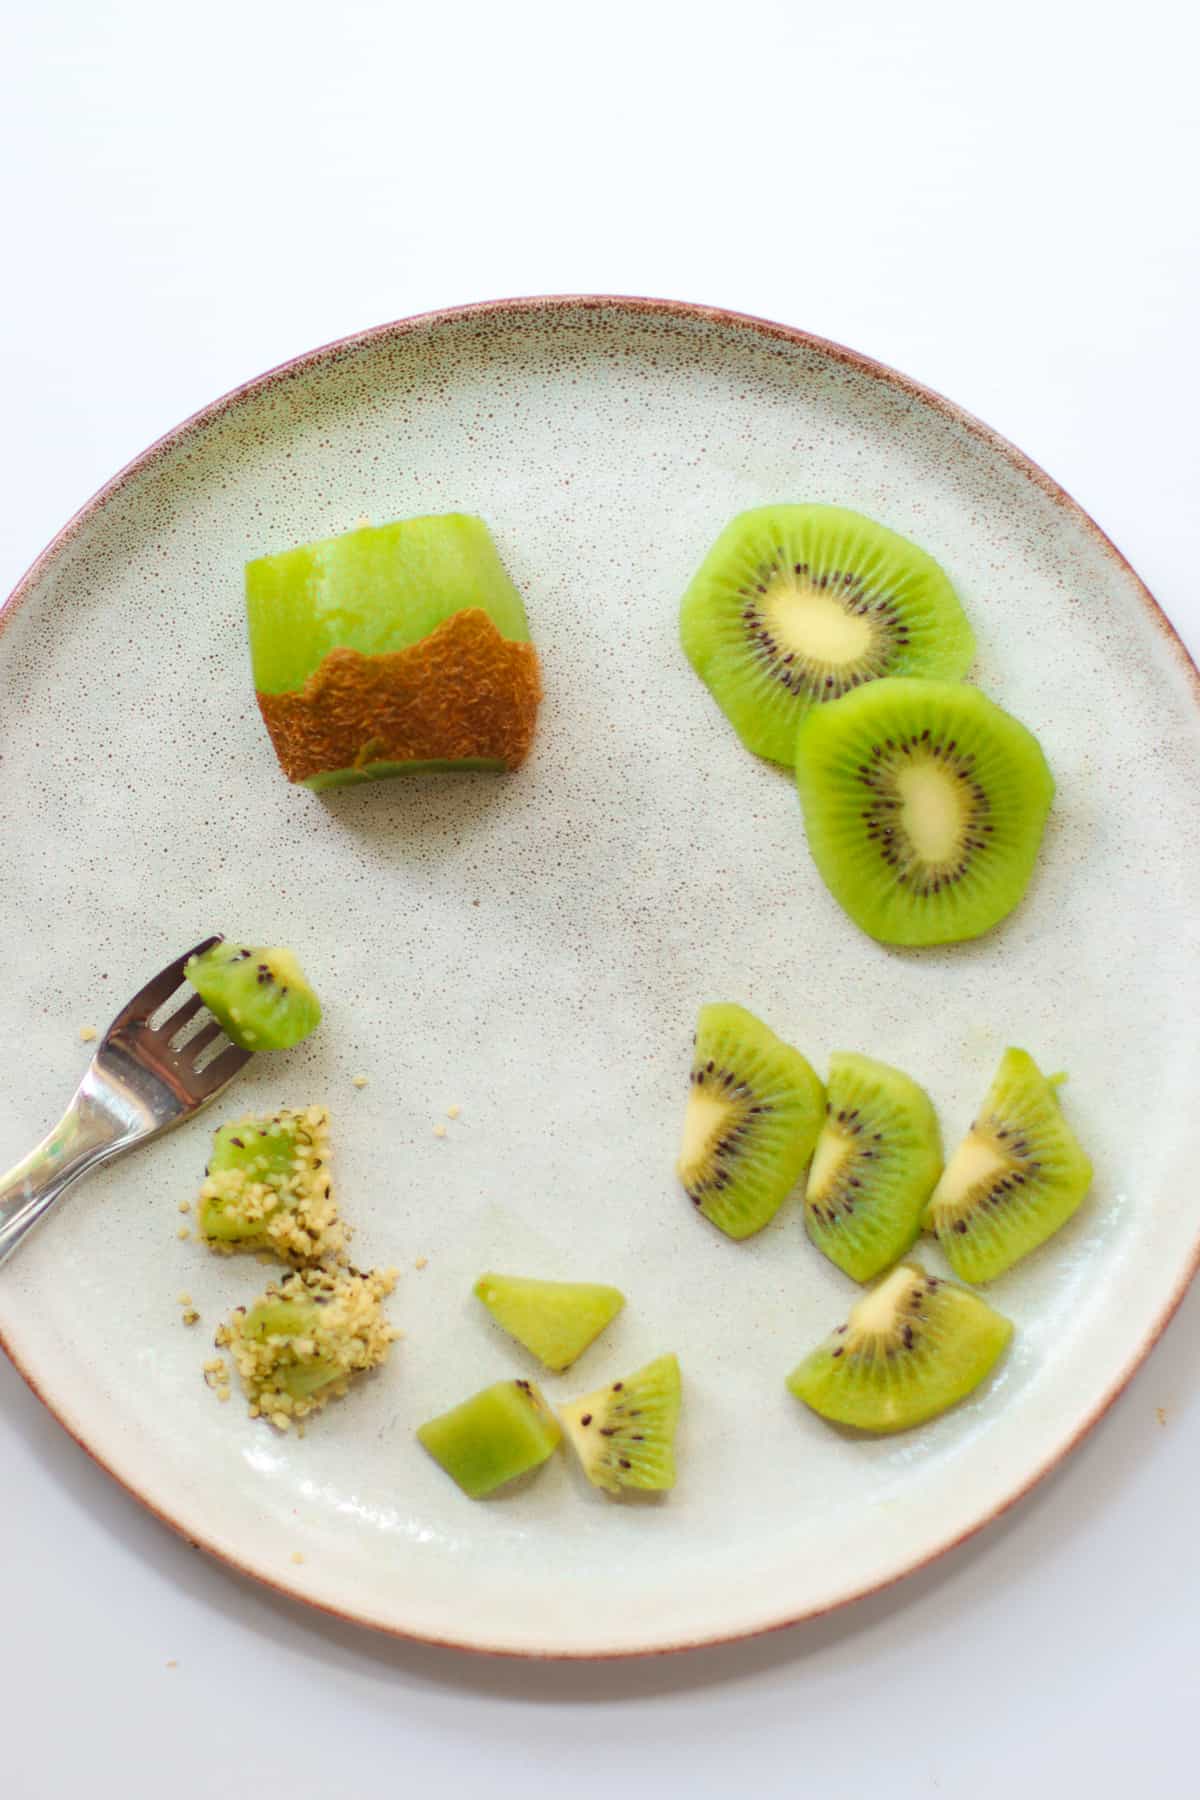 Kiwi sliced in appropriate ways for babies 6+ months and 9+ months.